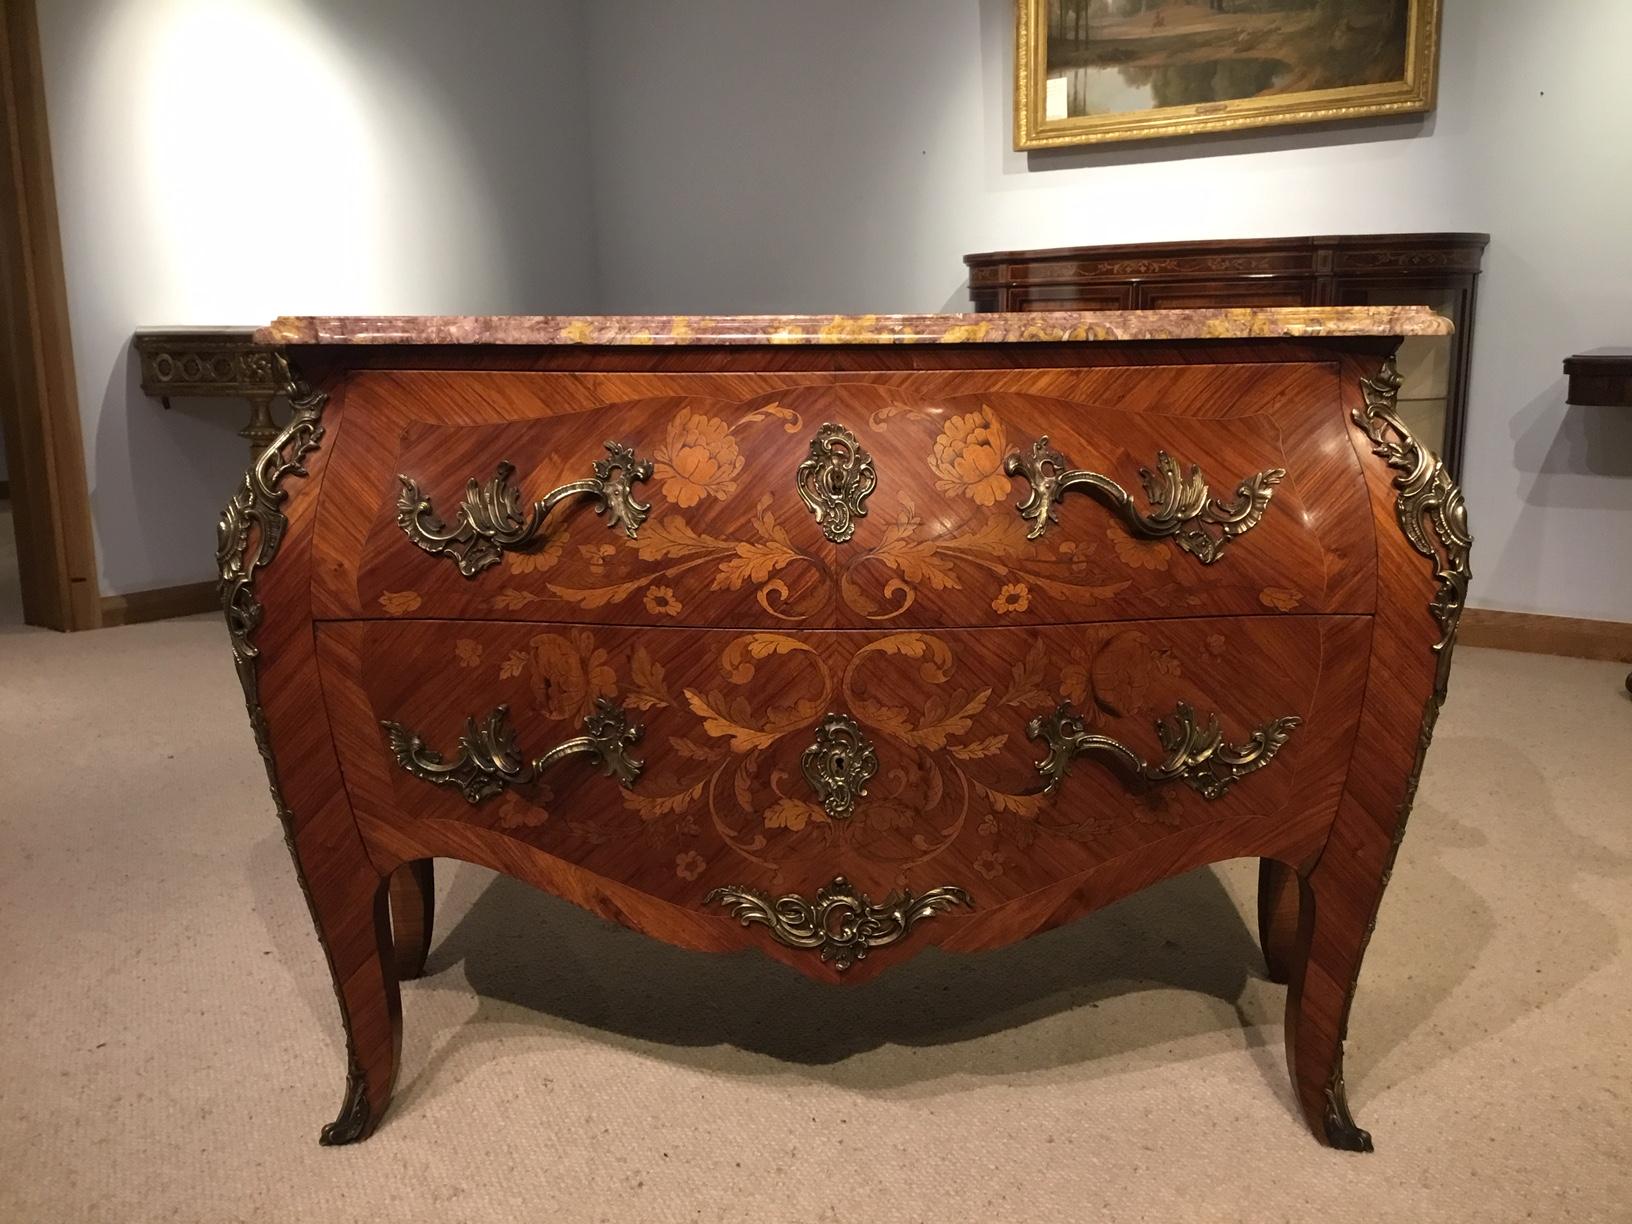 A Louis XV style kingwood, marquetry and ormolu-mounted French commode. The serpentine shaped 